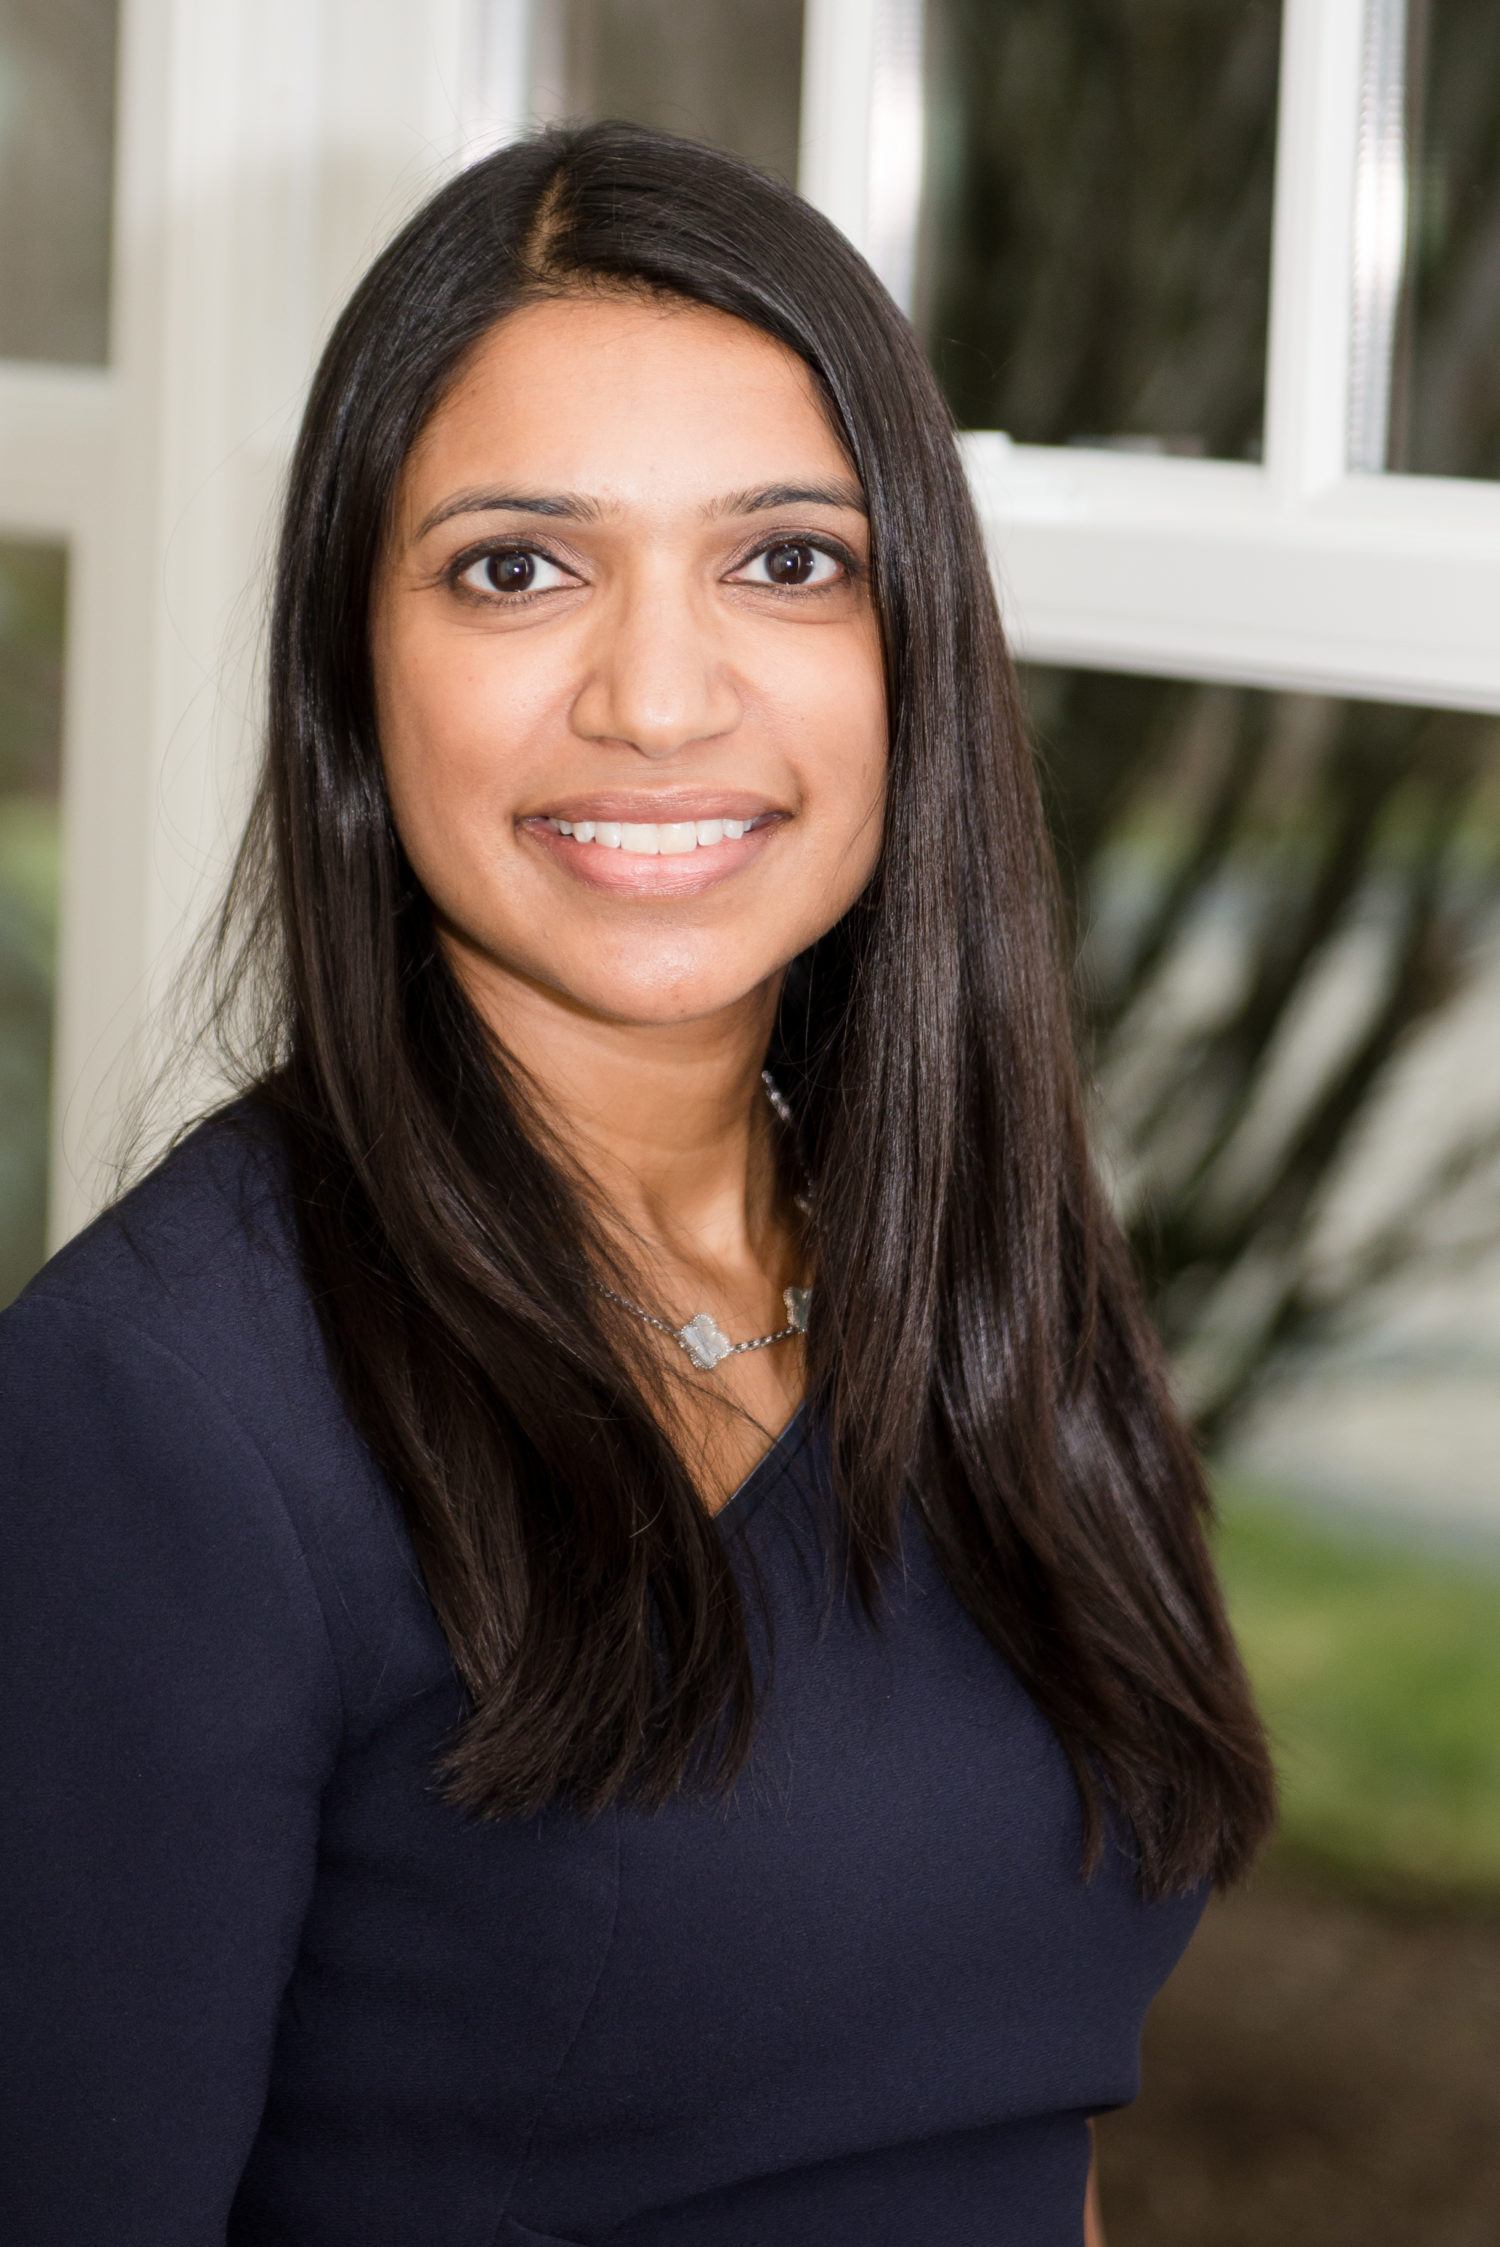 XRHealth Appoints Deepa Javeri as Chief Financial Officer